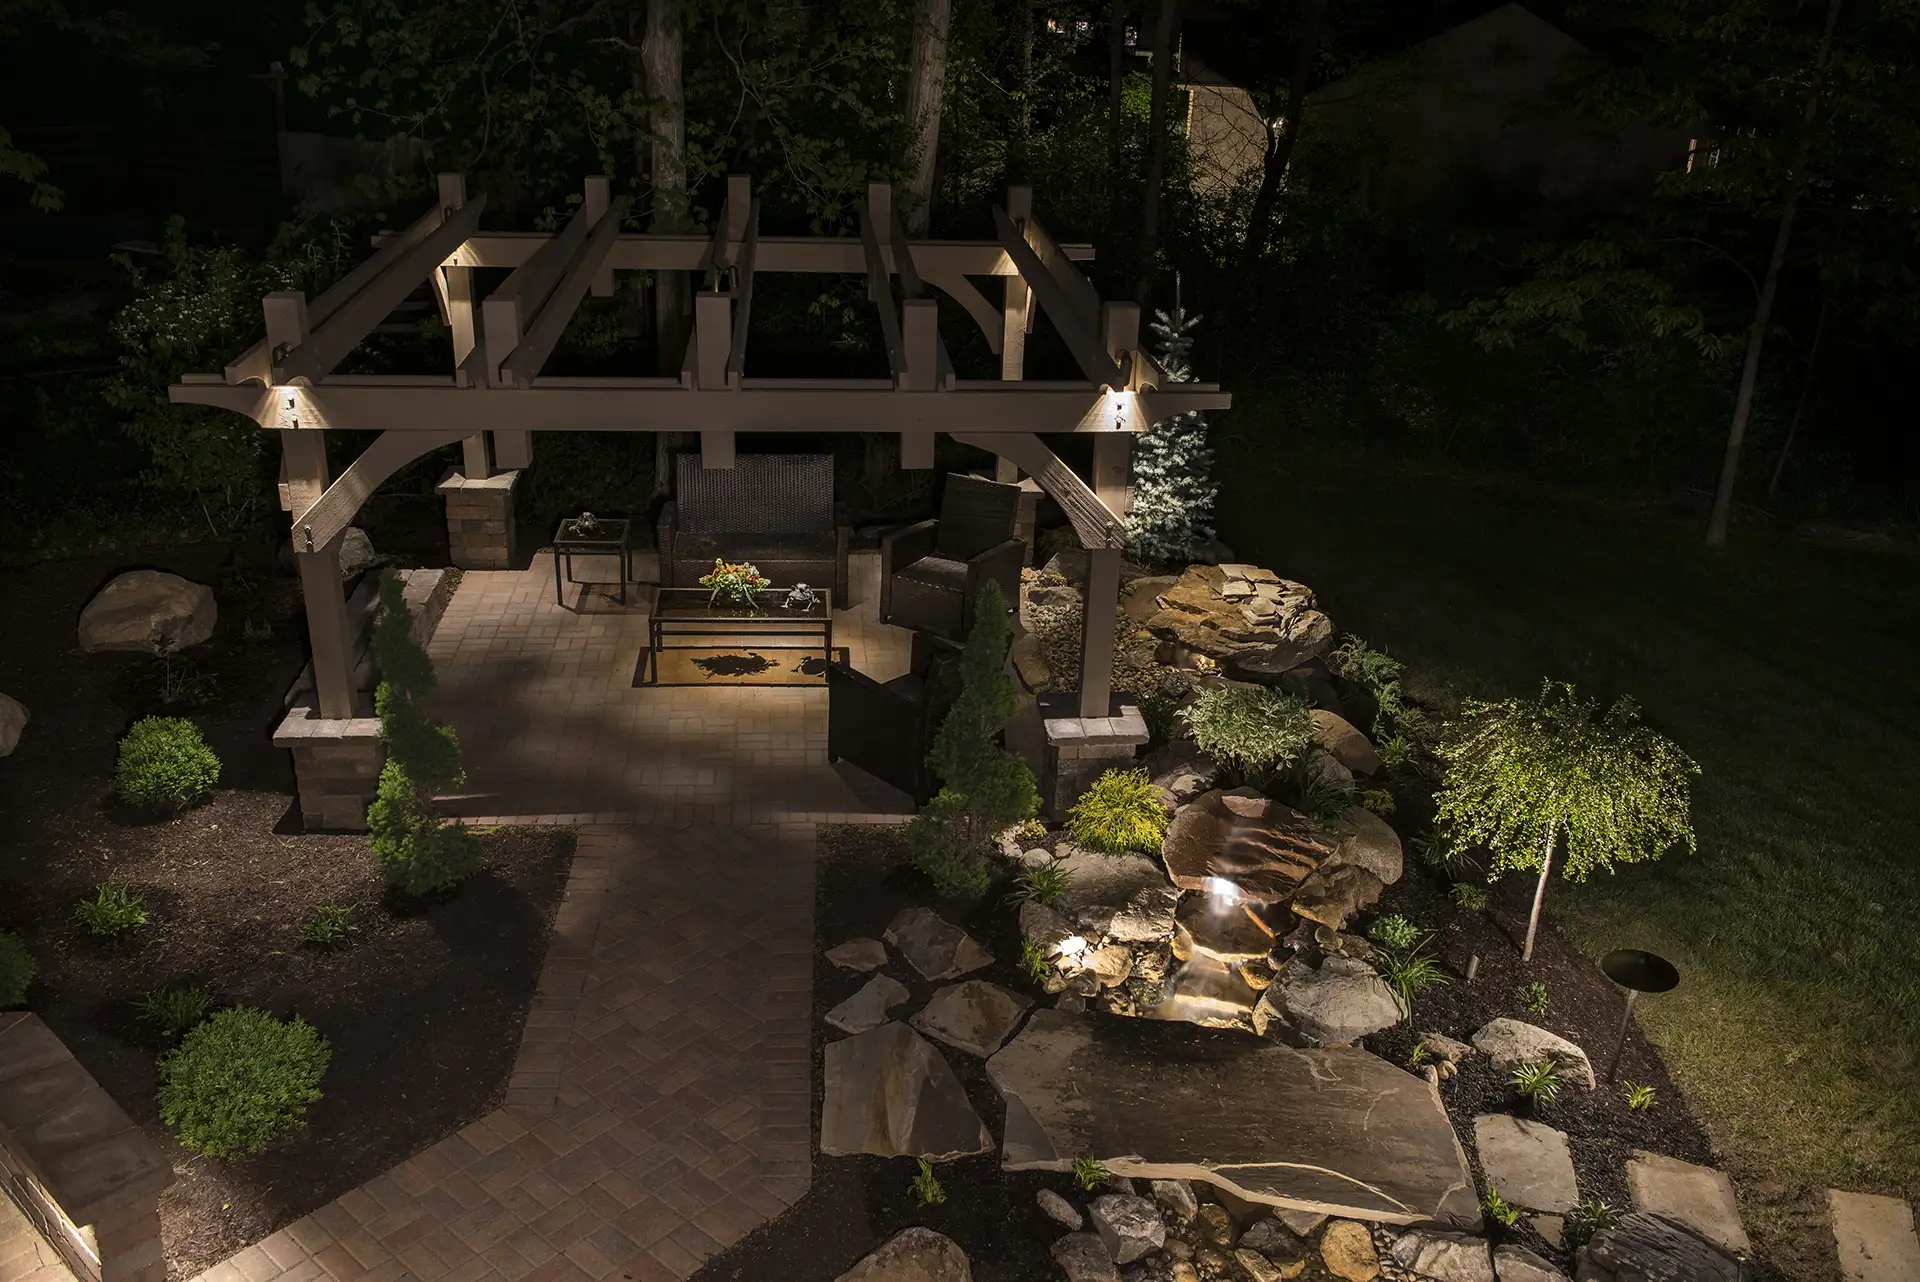 Darnell Dr image 3 pergola patio seating area landscape from above Lighthouse Outdoor Lighting and Audio Delaware